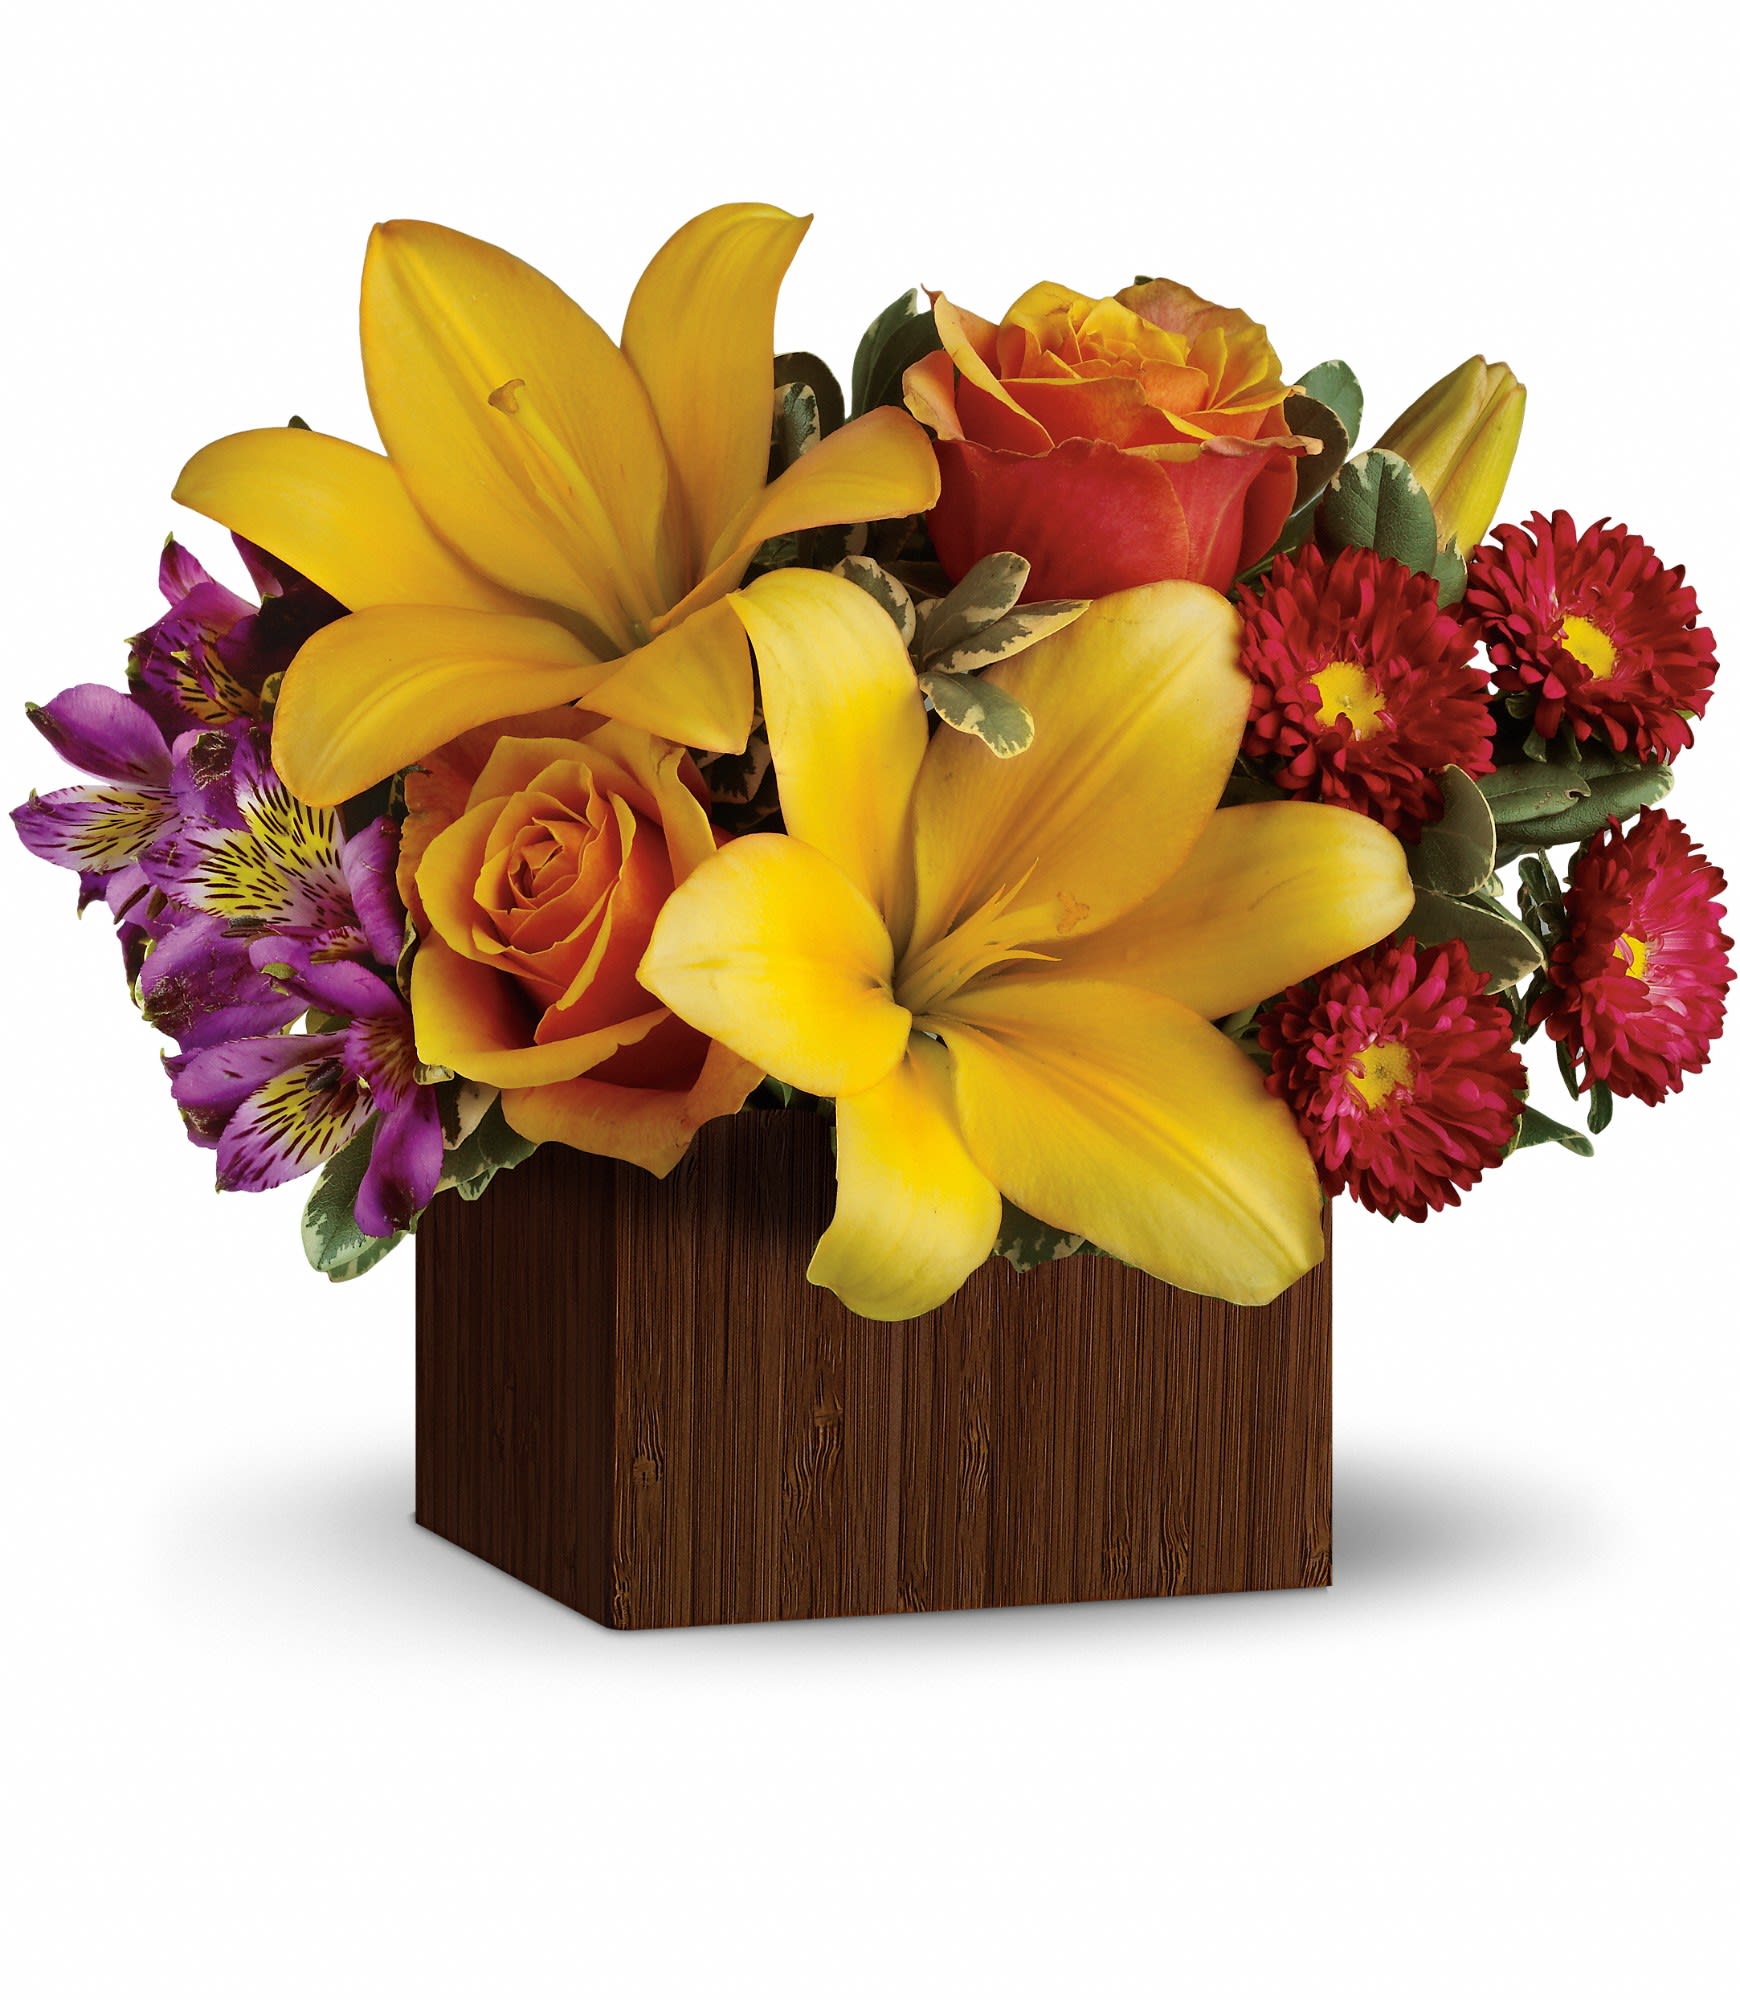 Teleflora's Full of Laughter - Arranged in a modern bamboo box, this stylish bouquet evokes the warm-hearted laughter of an island getaway. It's a cheerful choice for any occasion, from birthdays to hoorays!  